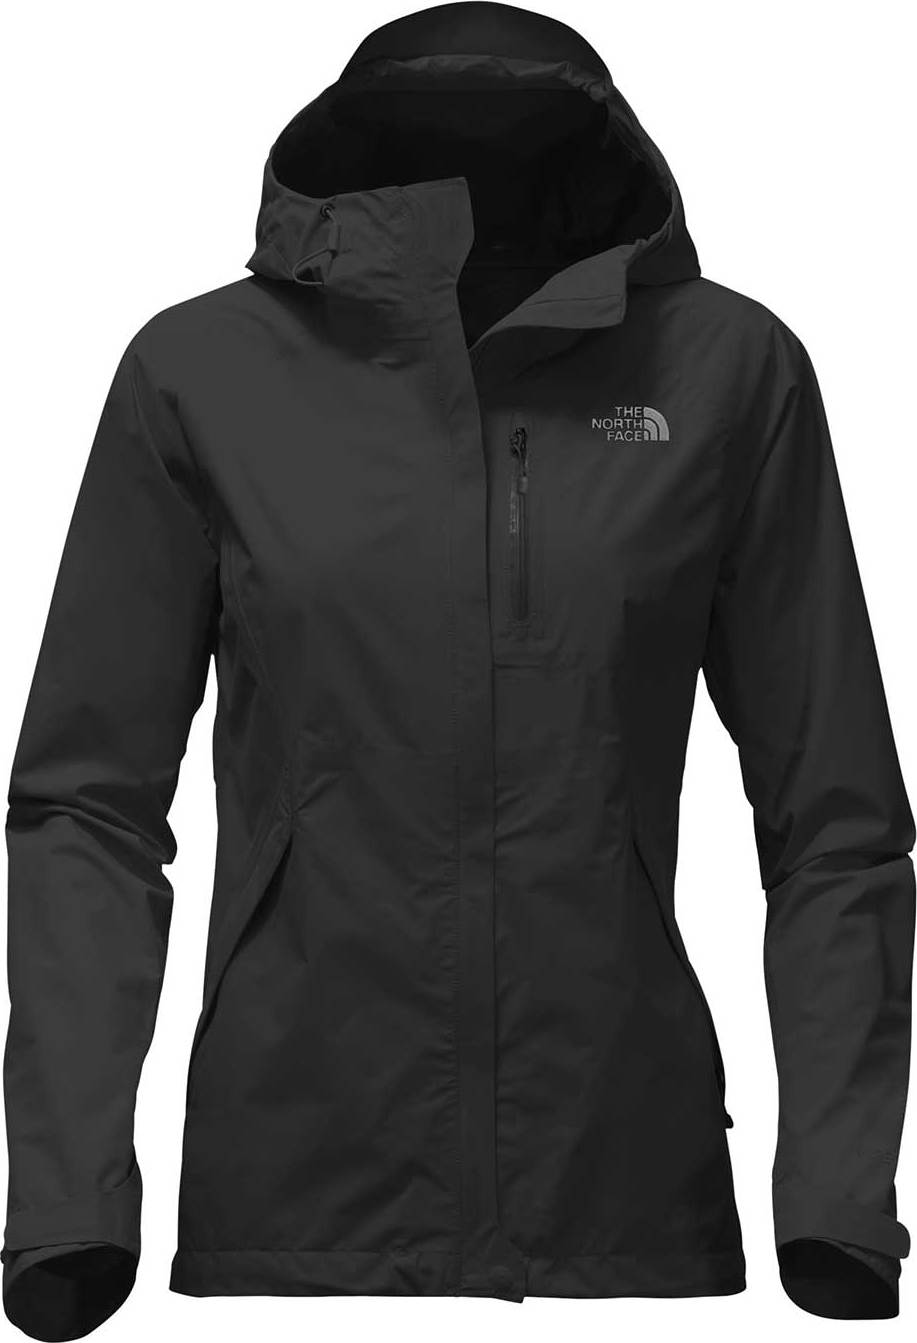 The North Face Dryzzle Jacket - Women's | Altitude Sports